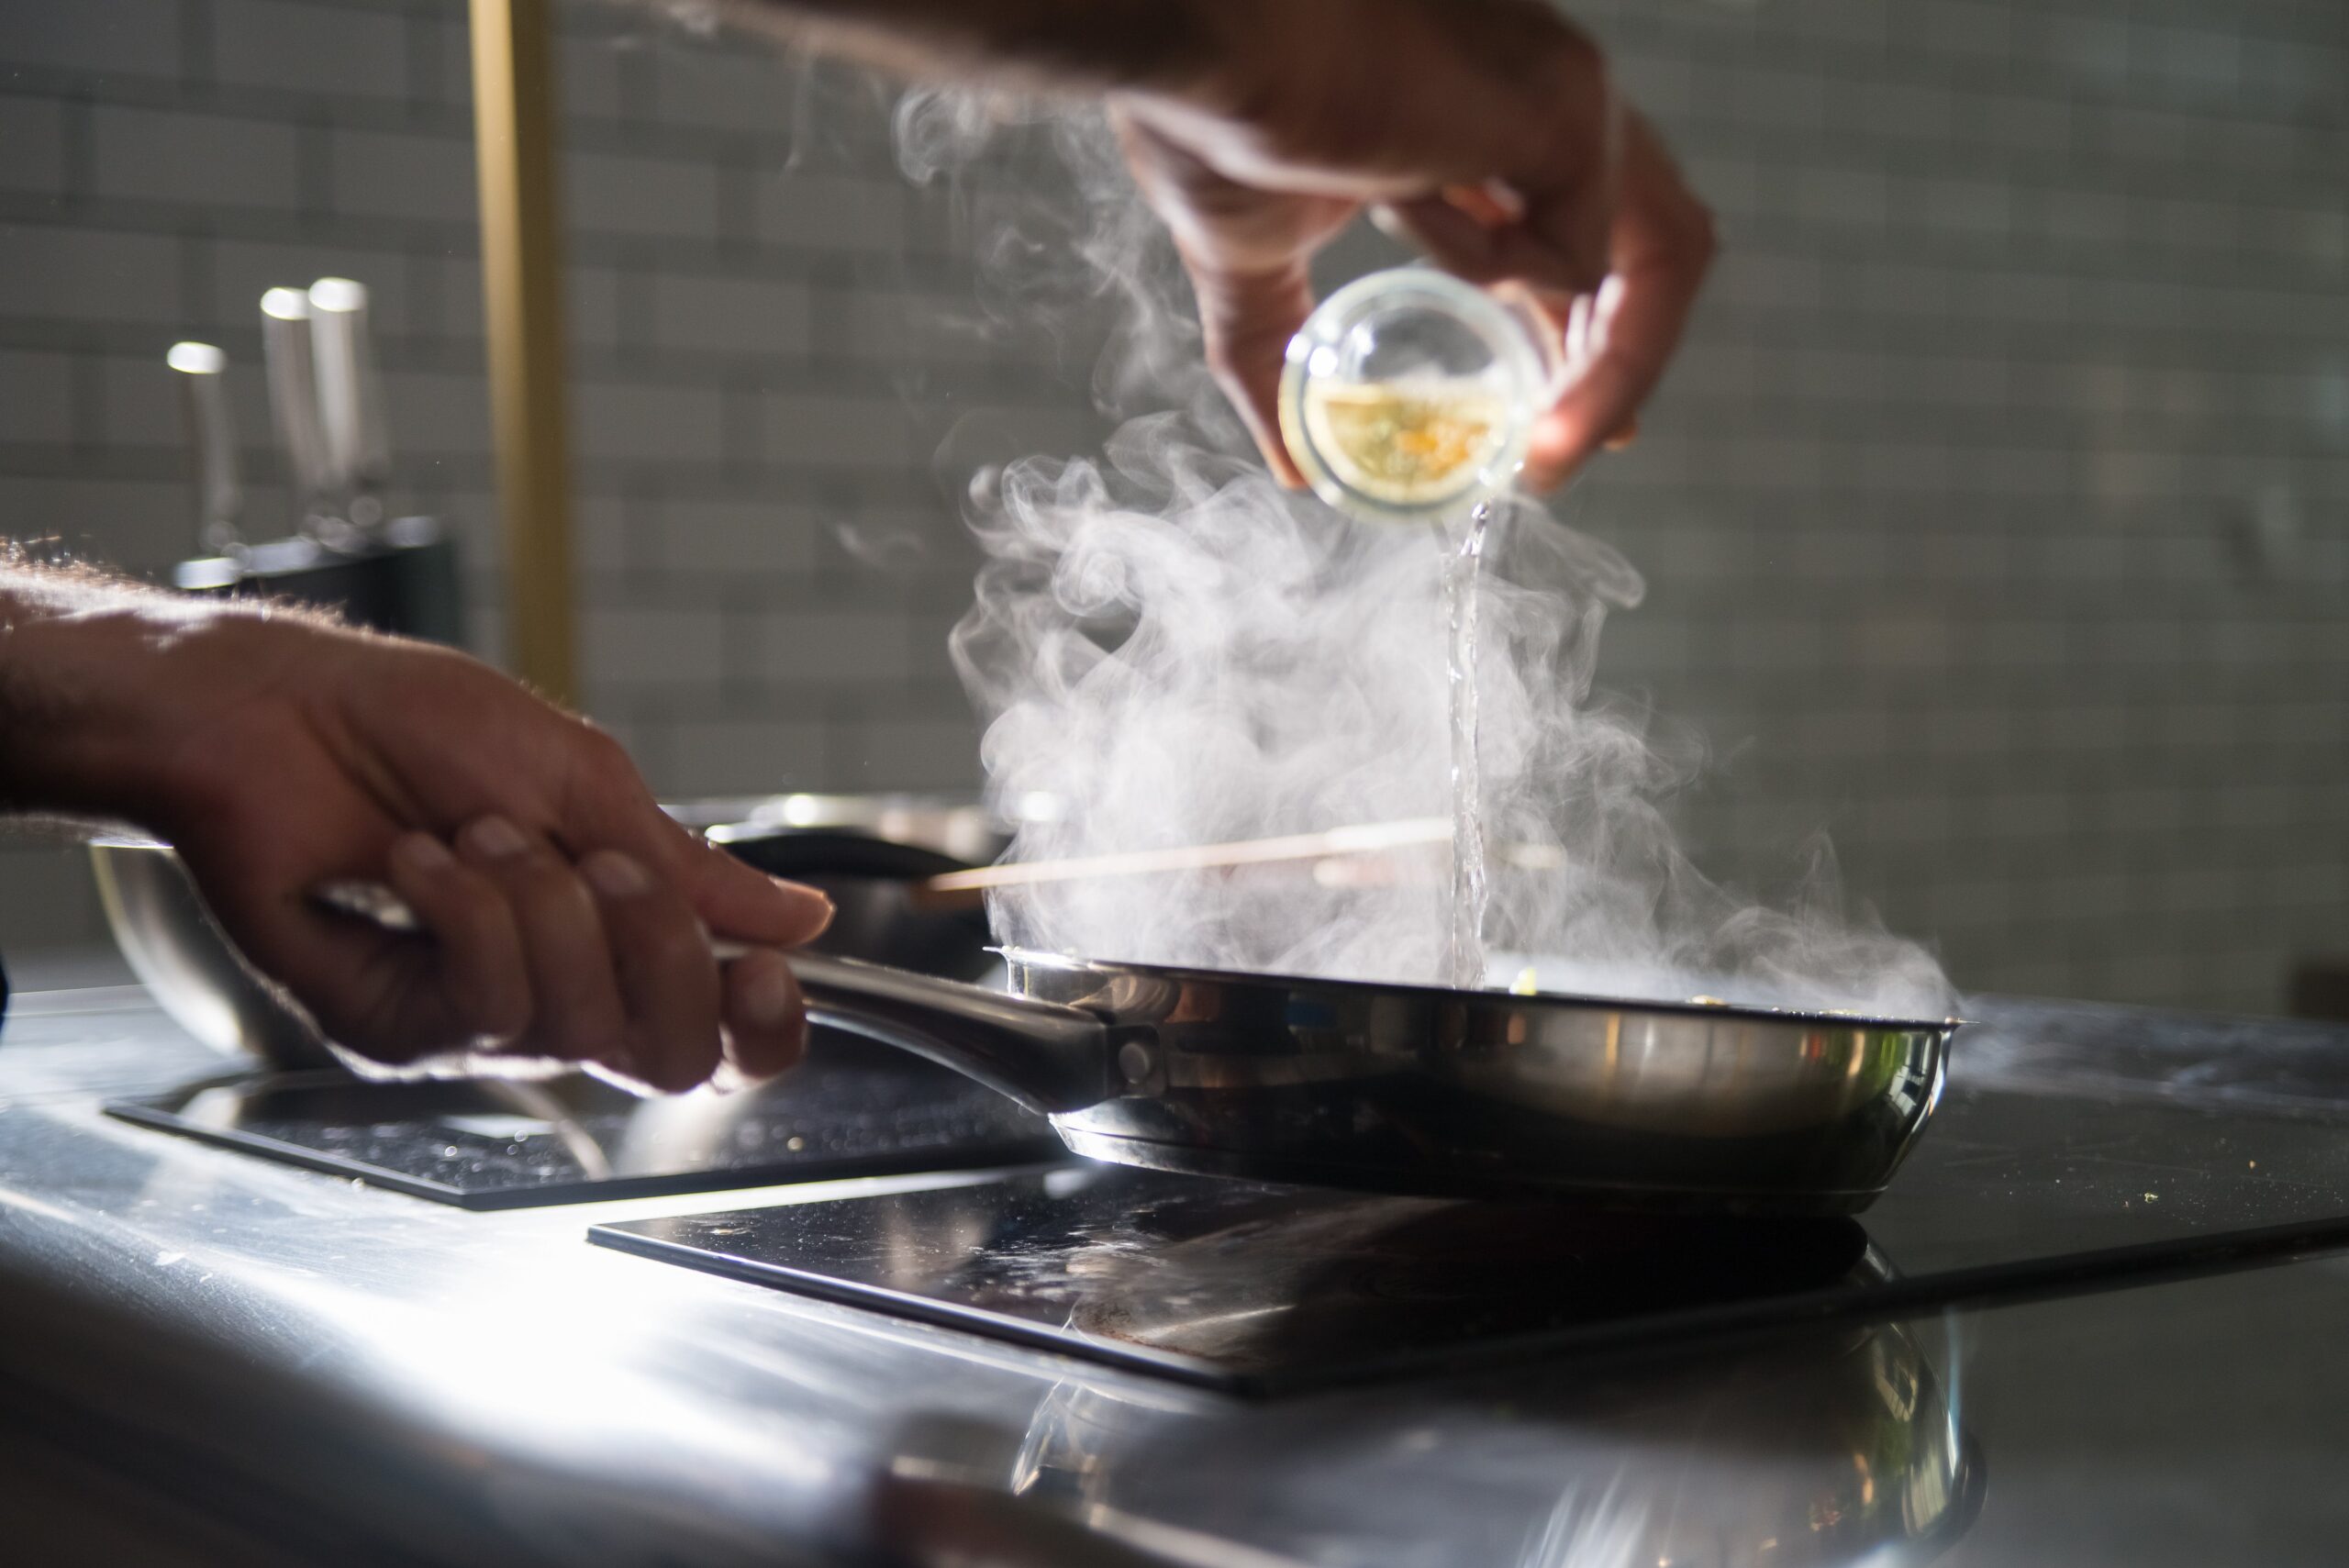 A person cooking on an electric stove